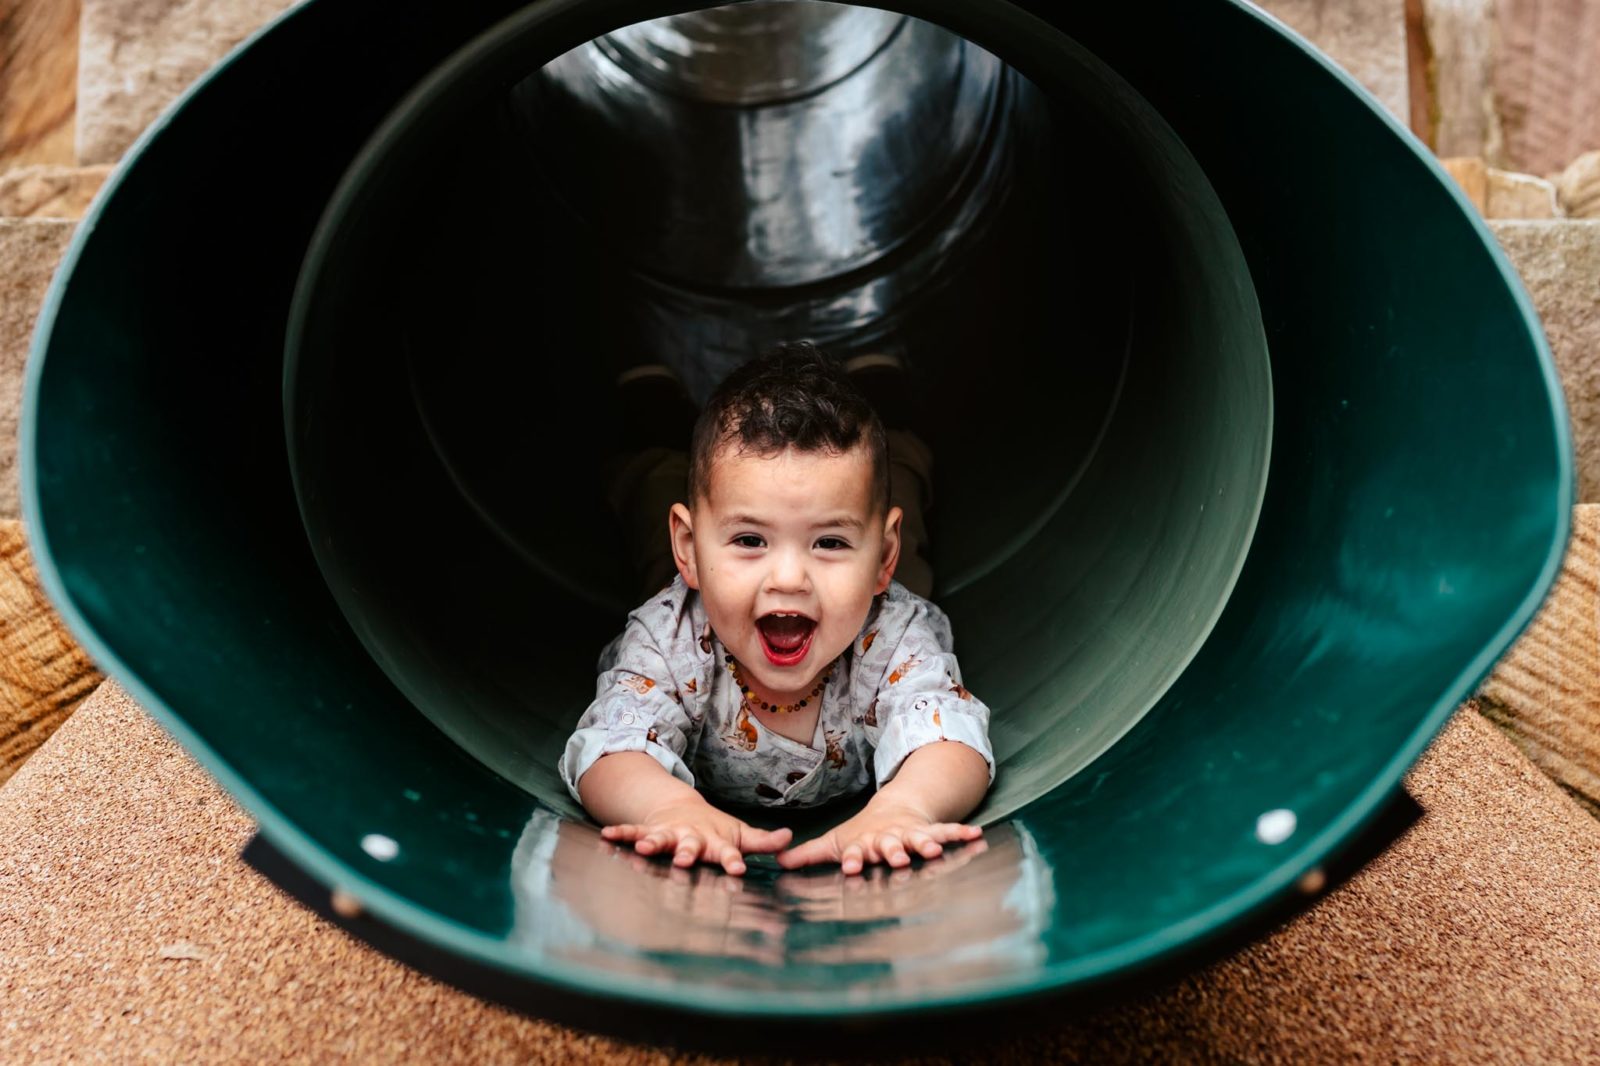 Toddler boy combing down a tube slide laughing